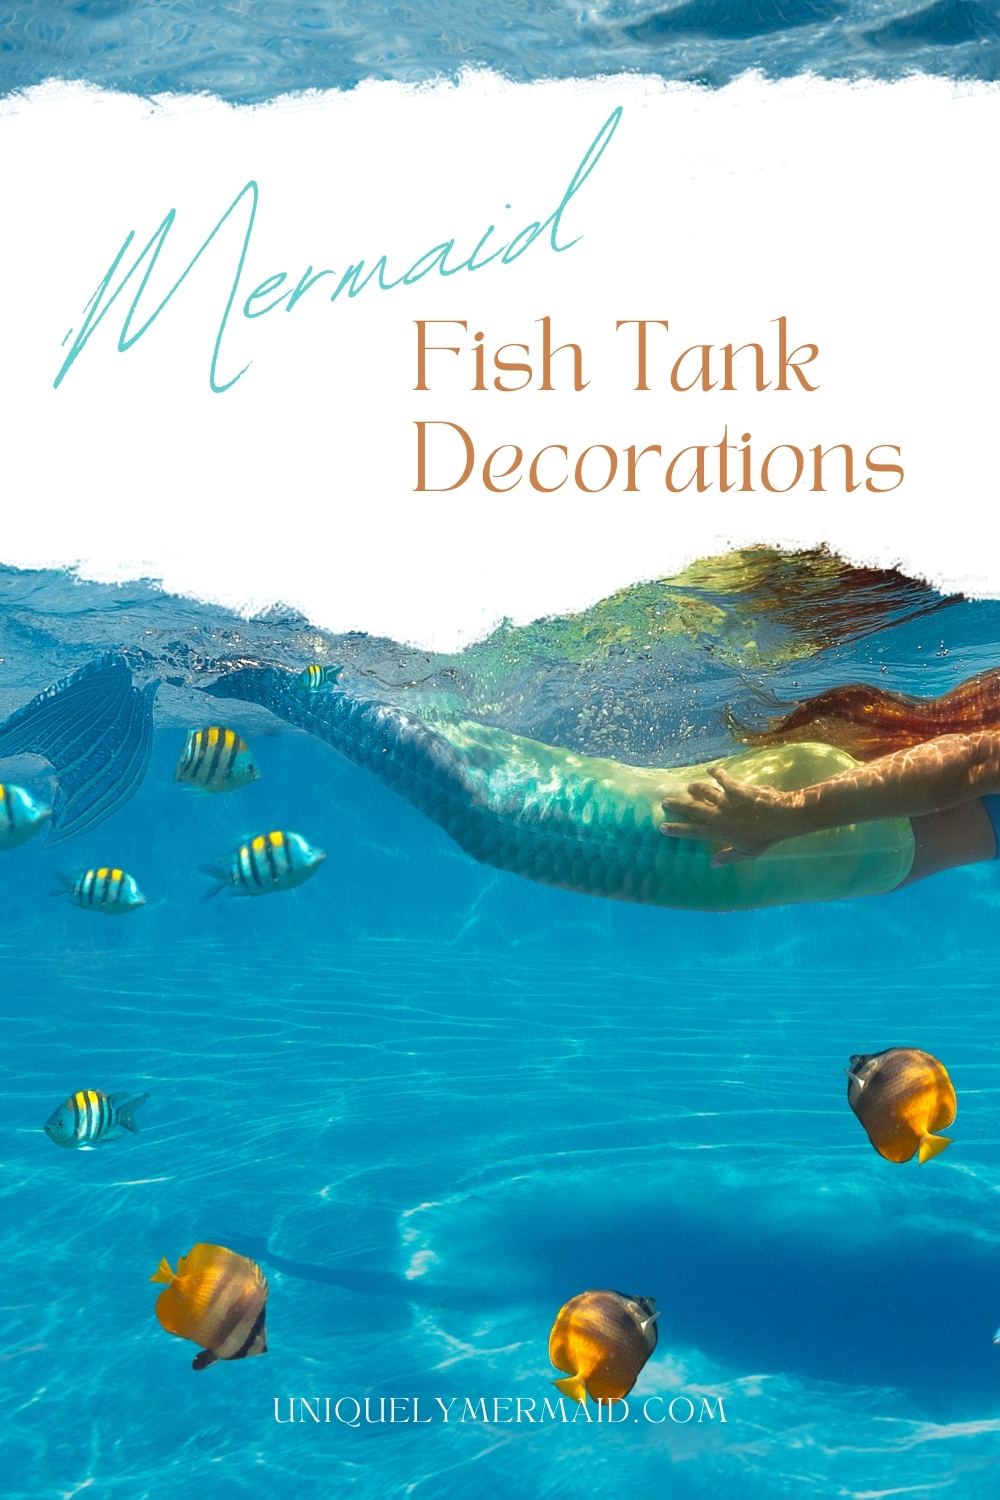 Cute and functional mermaid fish tank decorations in accessory sets and figurines will add flair to your aquarium!